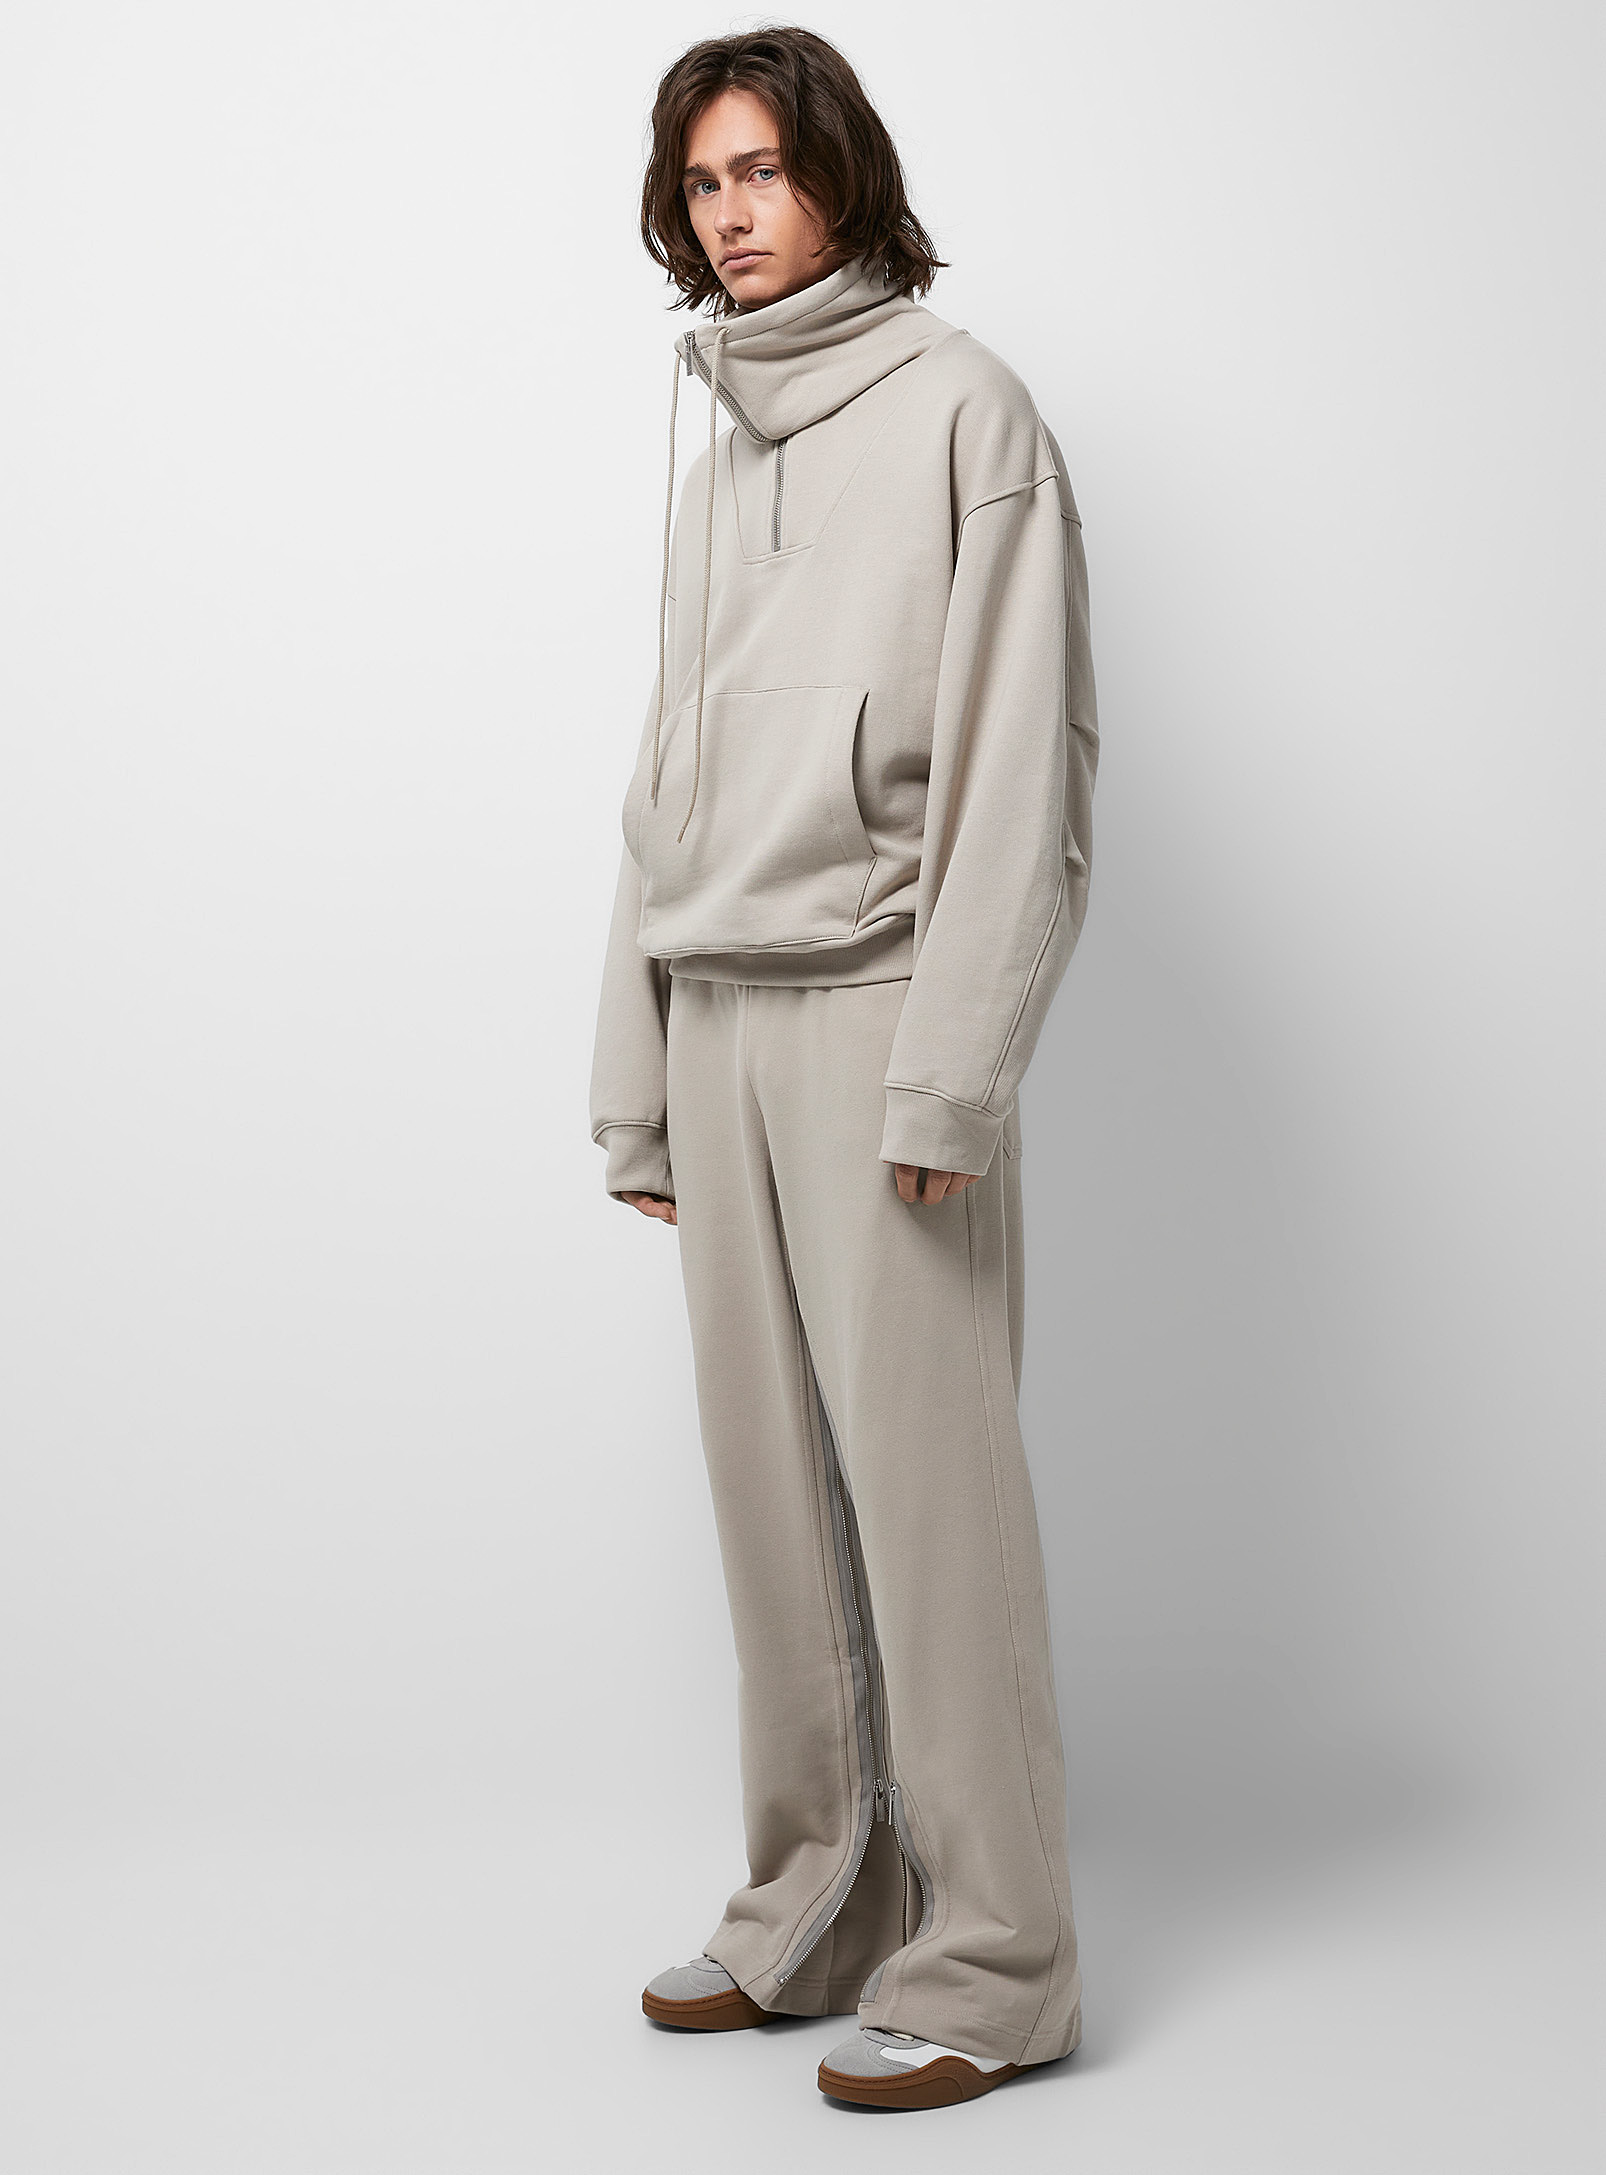 Helmut Lang Zippered Grey Jogger In Ivory/cream Beige